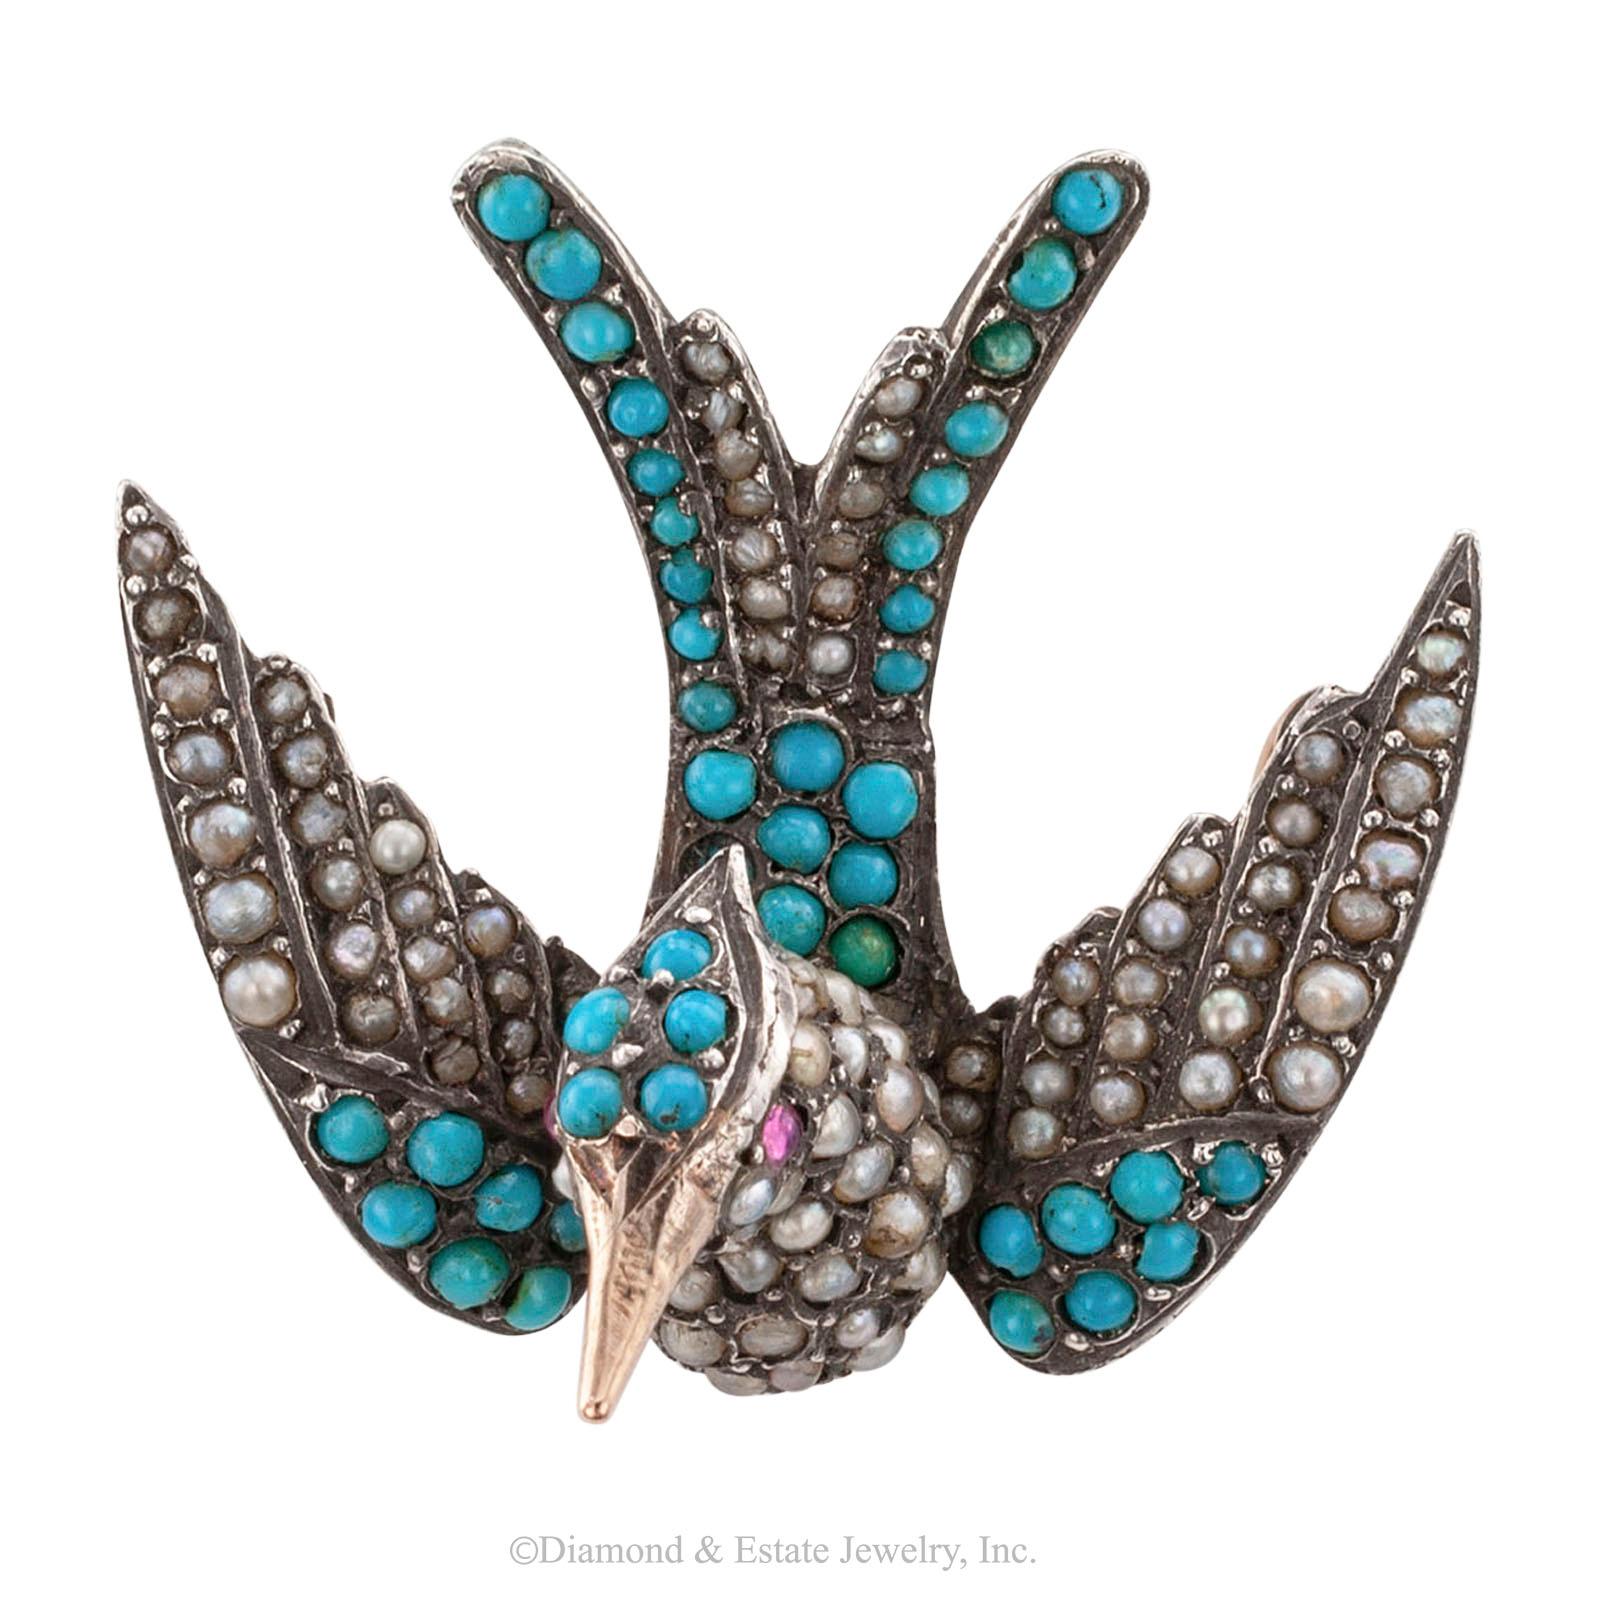 Victorian turquoise pearl ruby silver and gold phoenix bird brooch.

DETAILS:
Victorian phoenix bird turquoise pearl ruby silver and gold brooch circa 1880.
GEMSTONES: pearl, turquoise and ruby.
METAL: silver, gold.
MEASUREMENTS: approximately 1